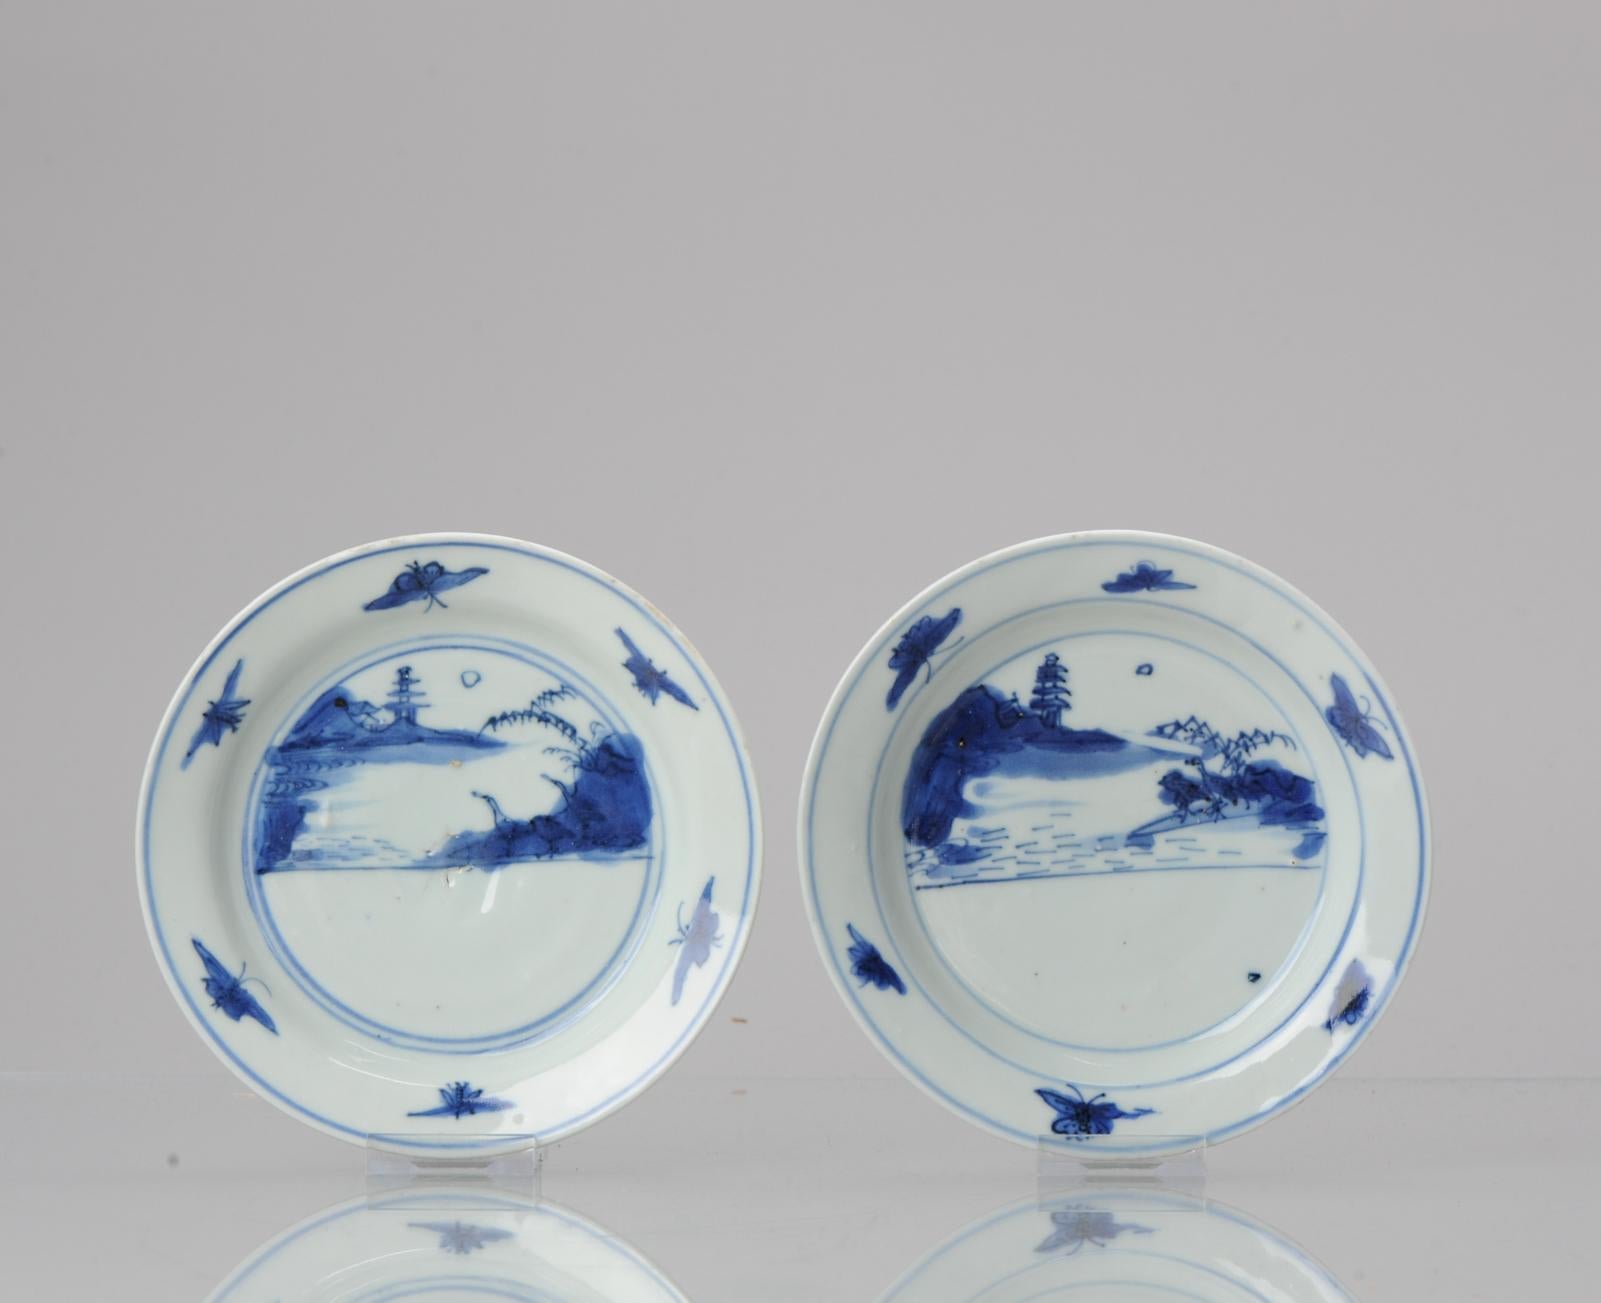 Description
A very nicely decorated Late Ming Blue and White Porcelain Dish with a landscape scene situated in two concentric circles with Ducks/Geese under a pine tree in a mountainious landscape with a pagode in the background. The moon at te